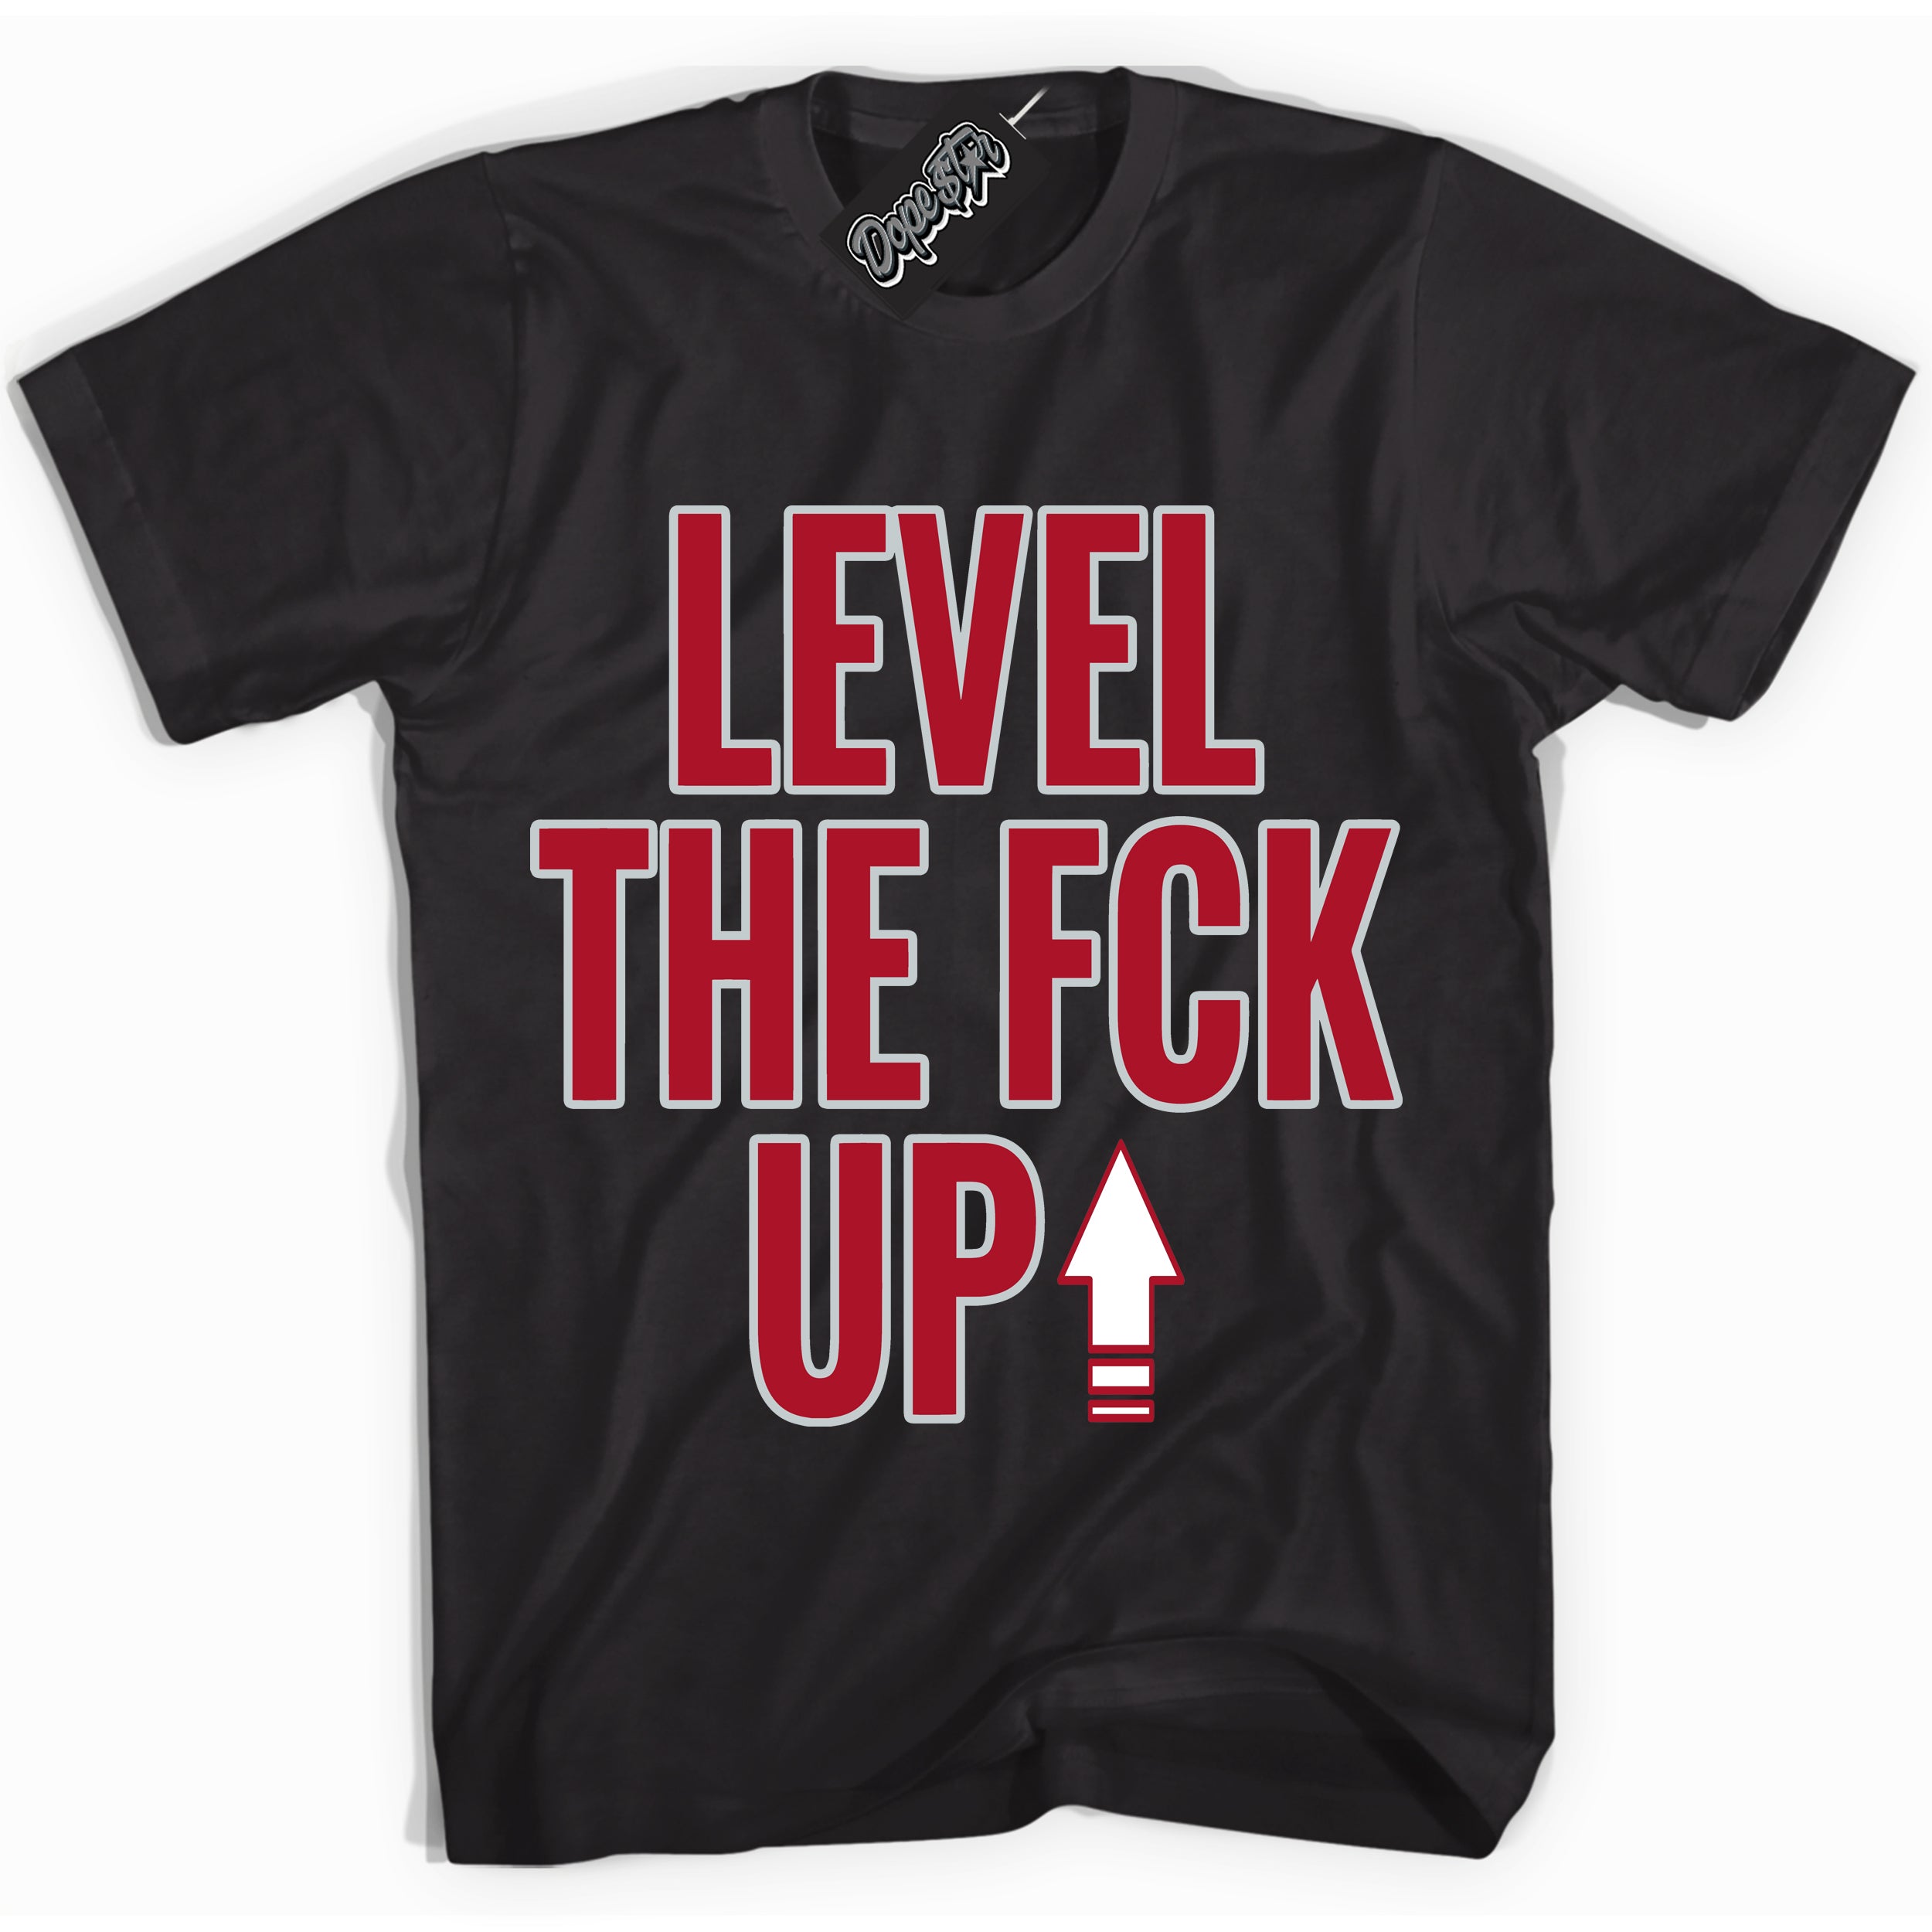 Cool Black Shirt with “ Level The Fck Up” design that perfectly matches Reverse Ultraman Sneakers.